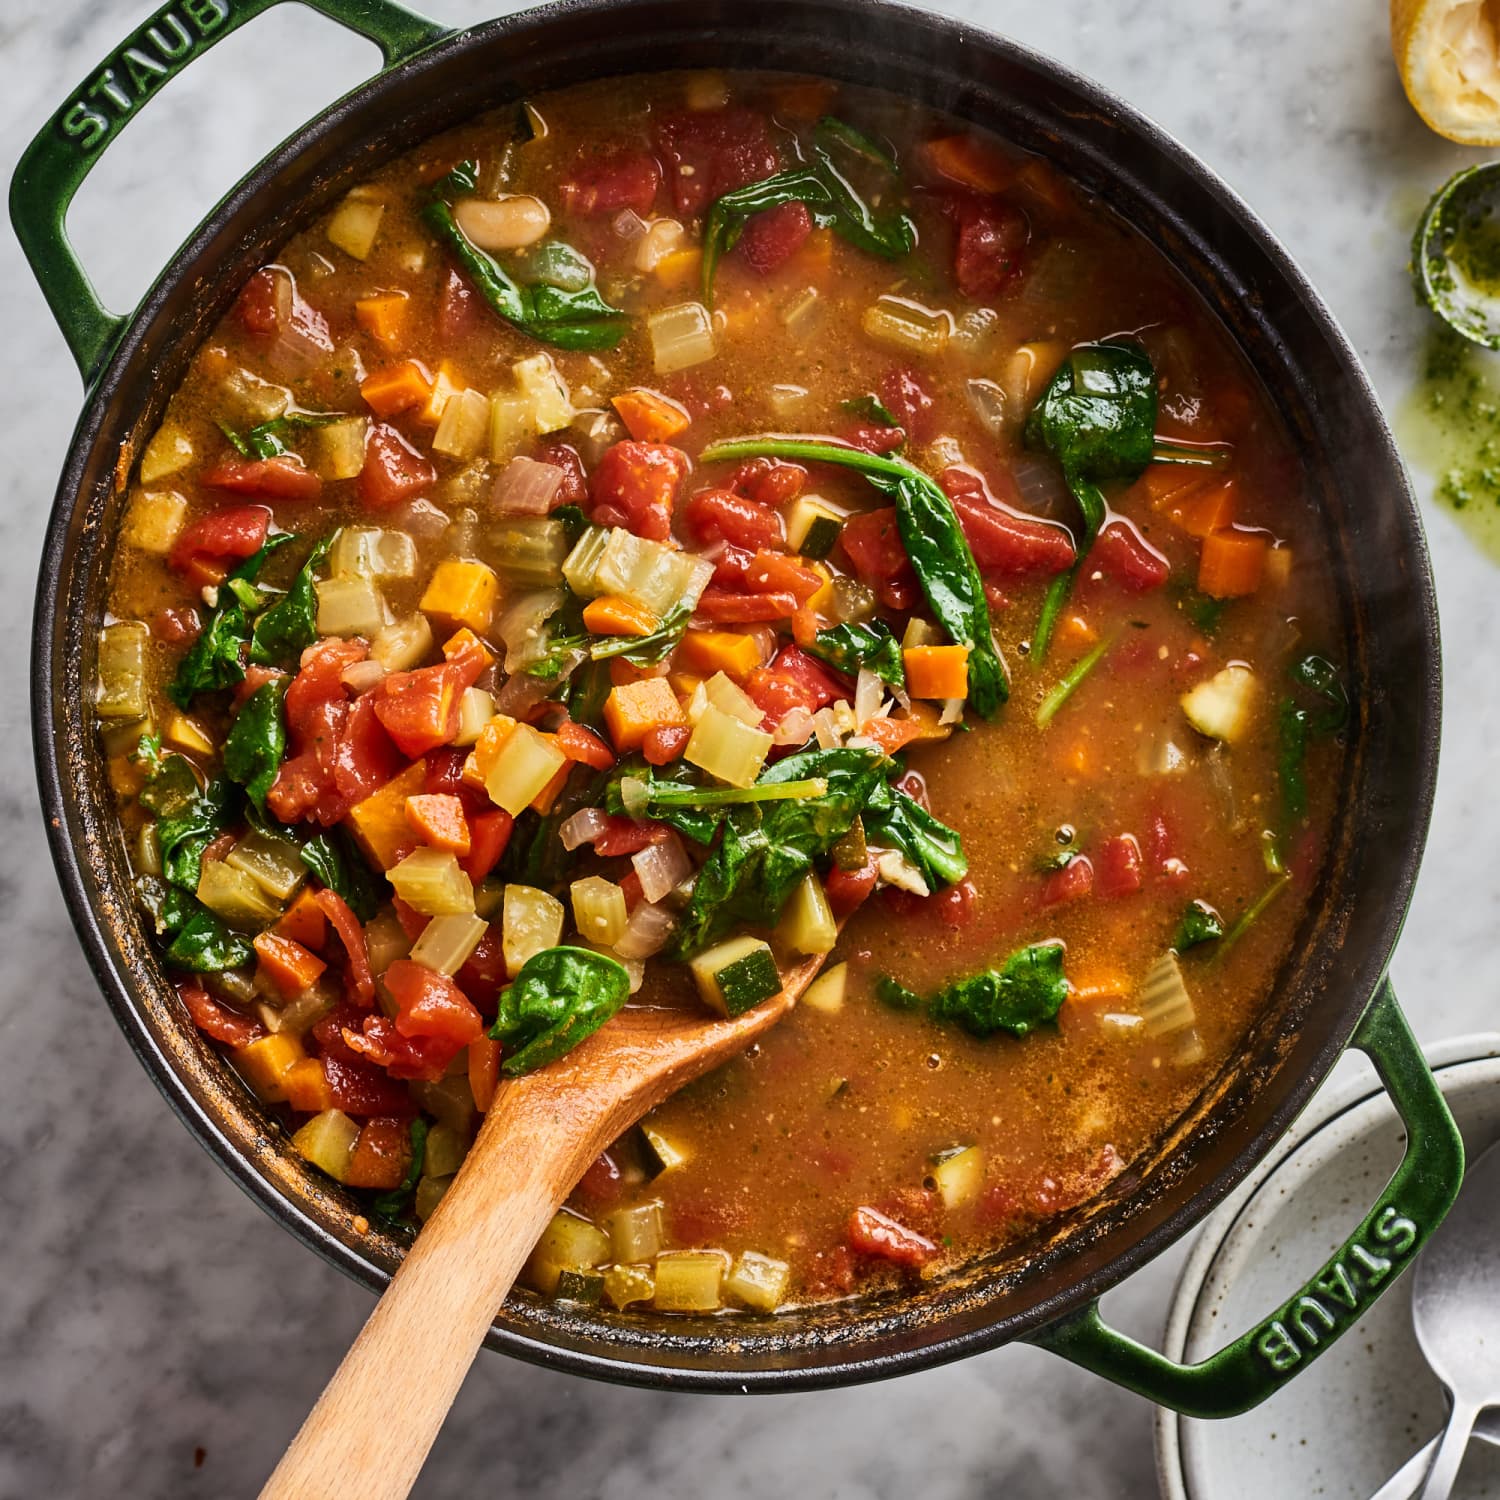 https://cdn.apartmenttherapy.info/image/upload/f_jpg,q_auto:eco,c_fill,g_auto,w_1500,ar_1:1/k%2FPhoto%2FRecipes%2F2019-12-How-To-Classic-Minestrone-Soup%2FHT-Classic-Minestrone-Soup_035